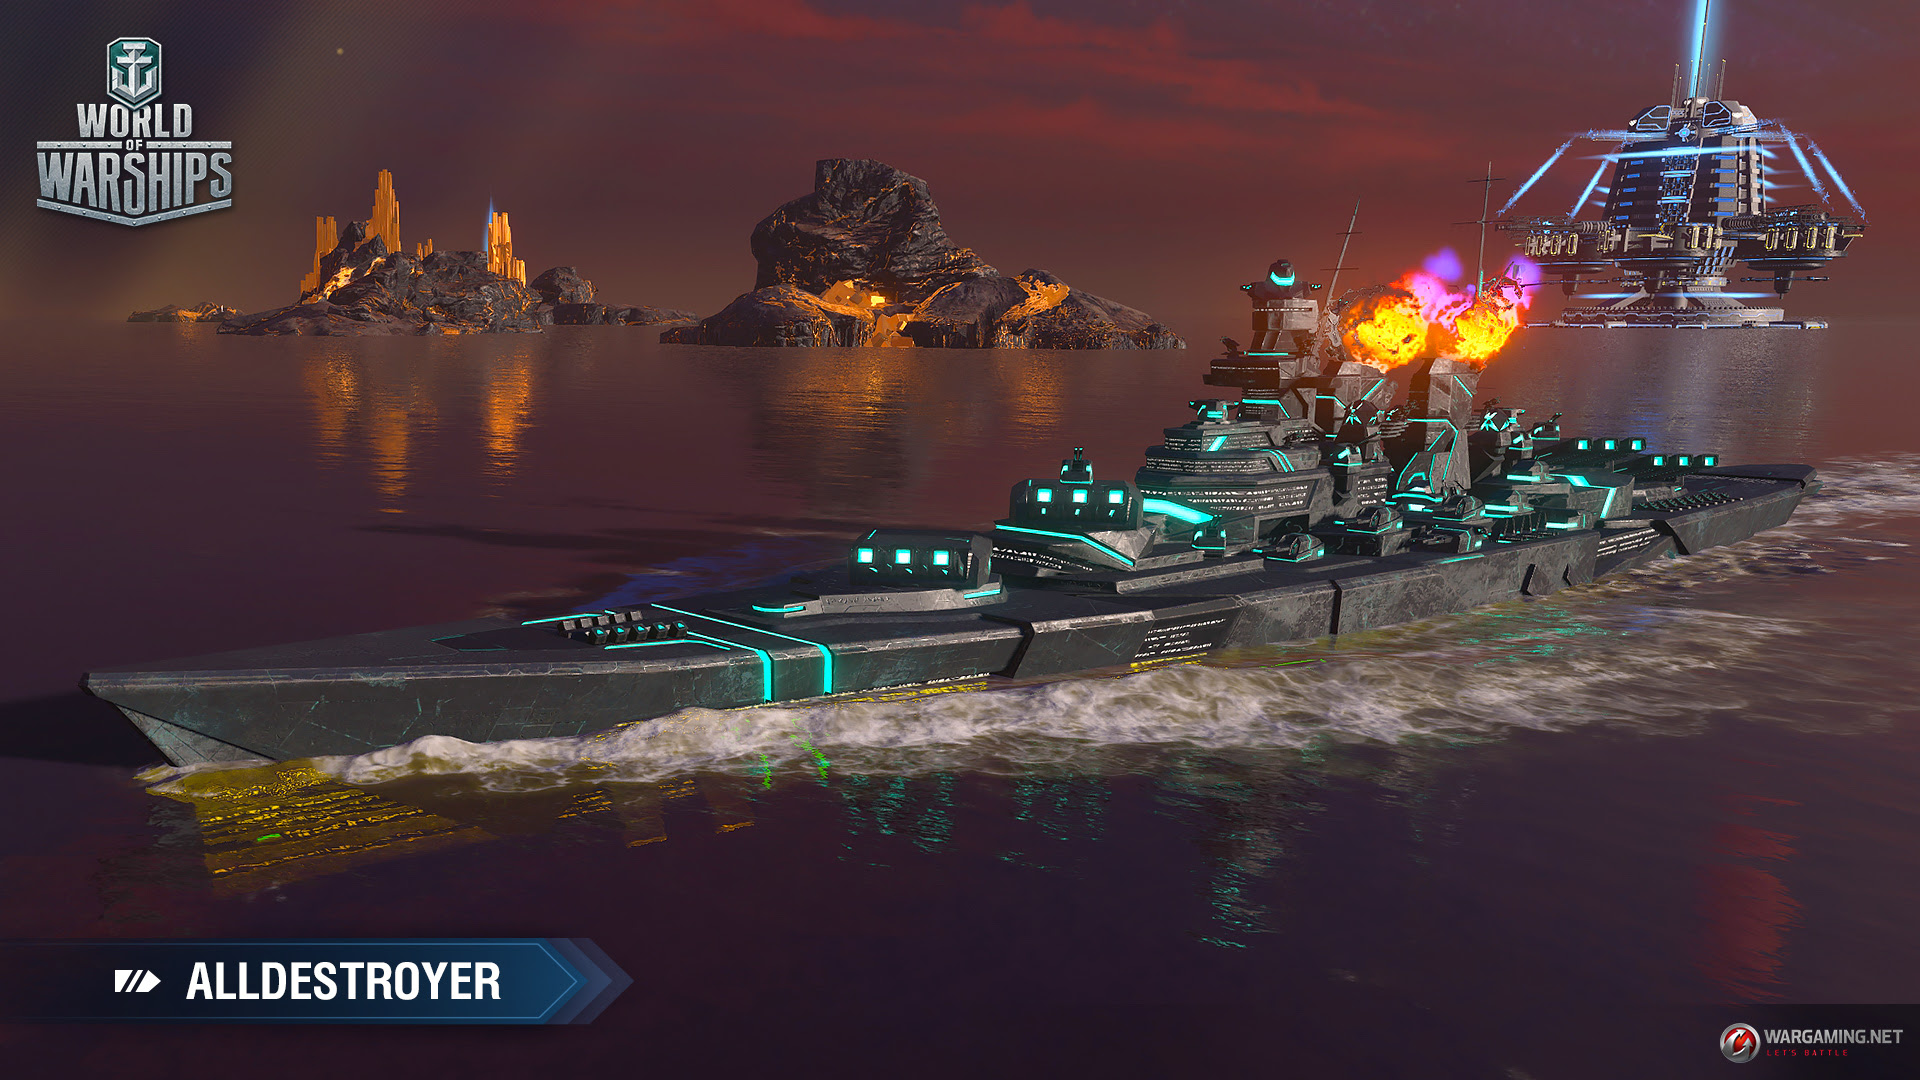 space battles world of warships